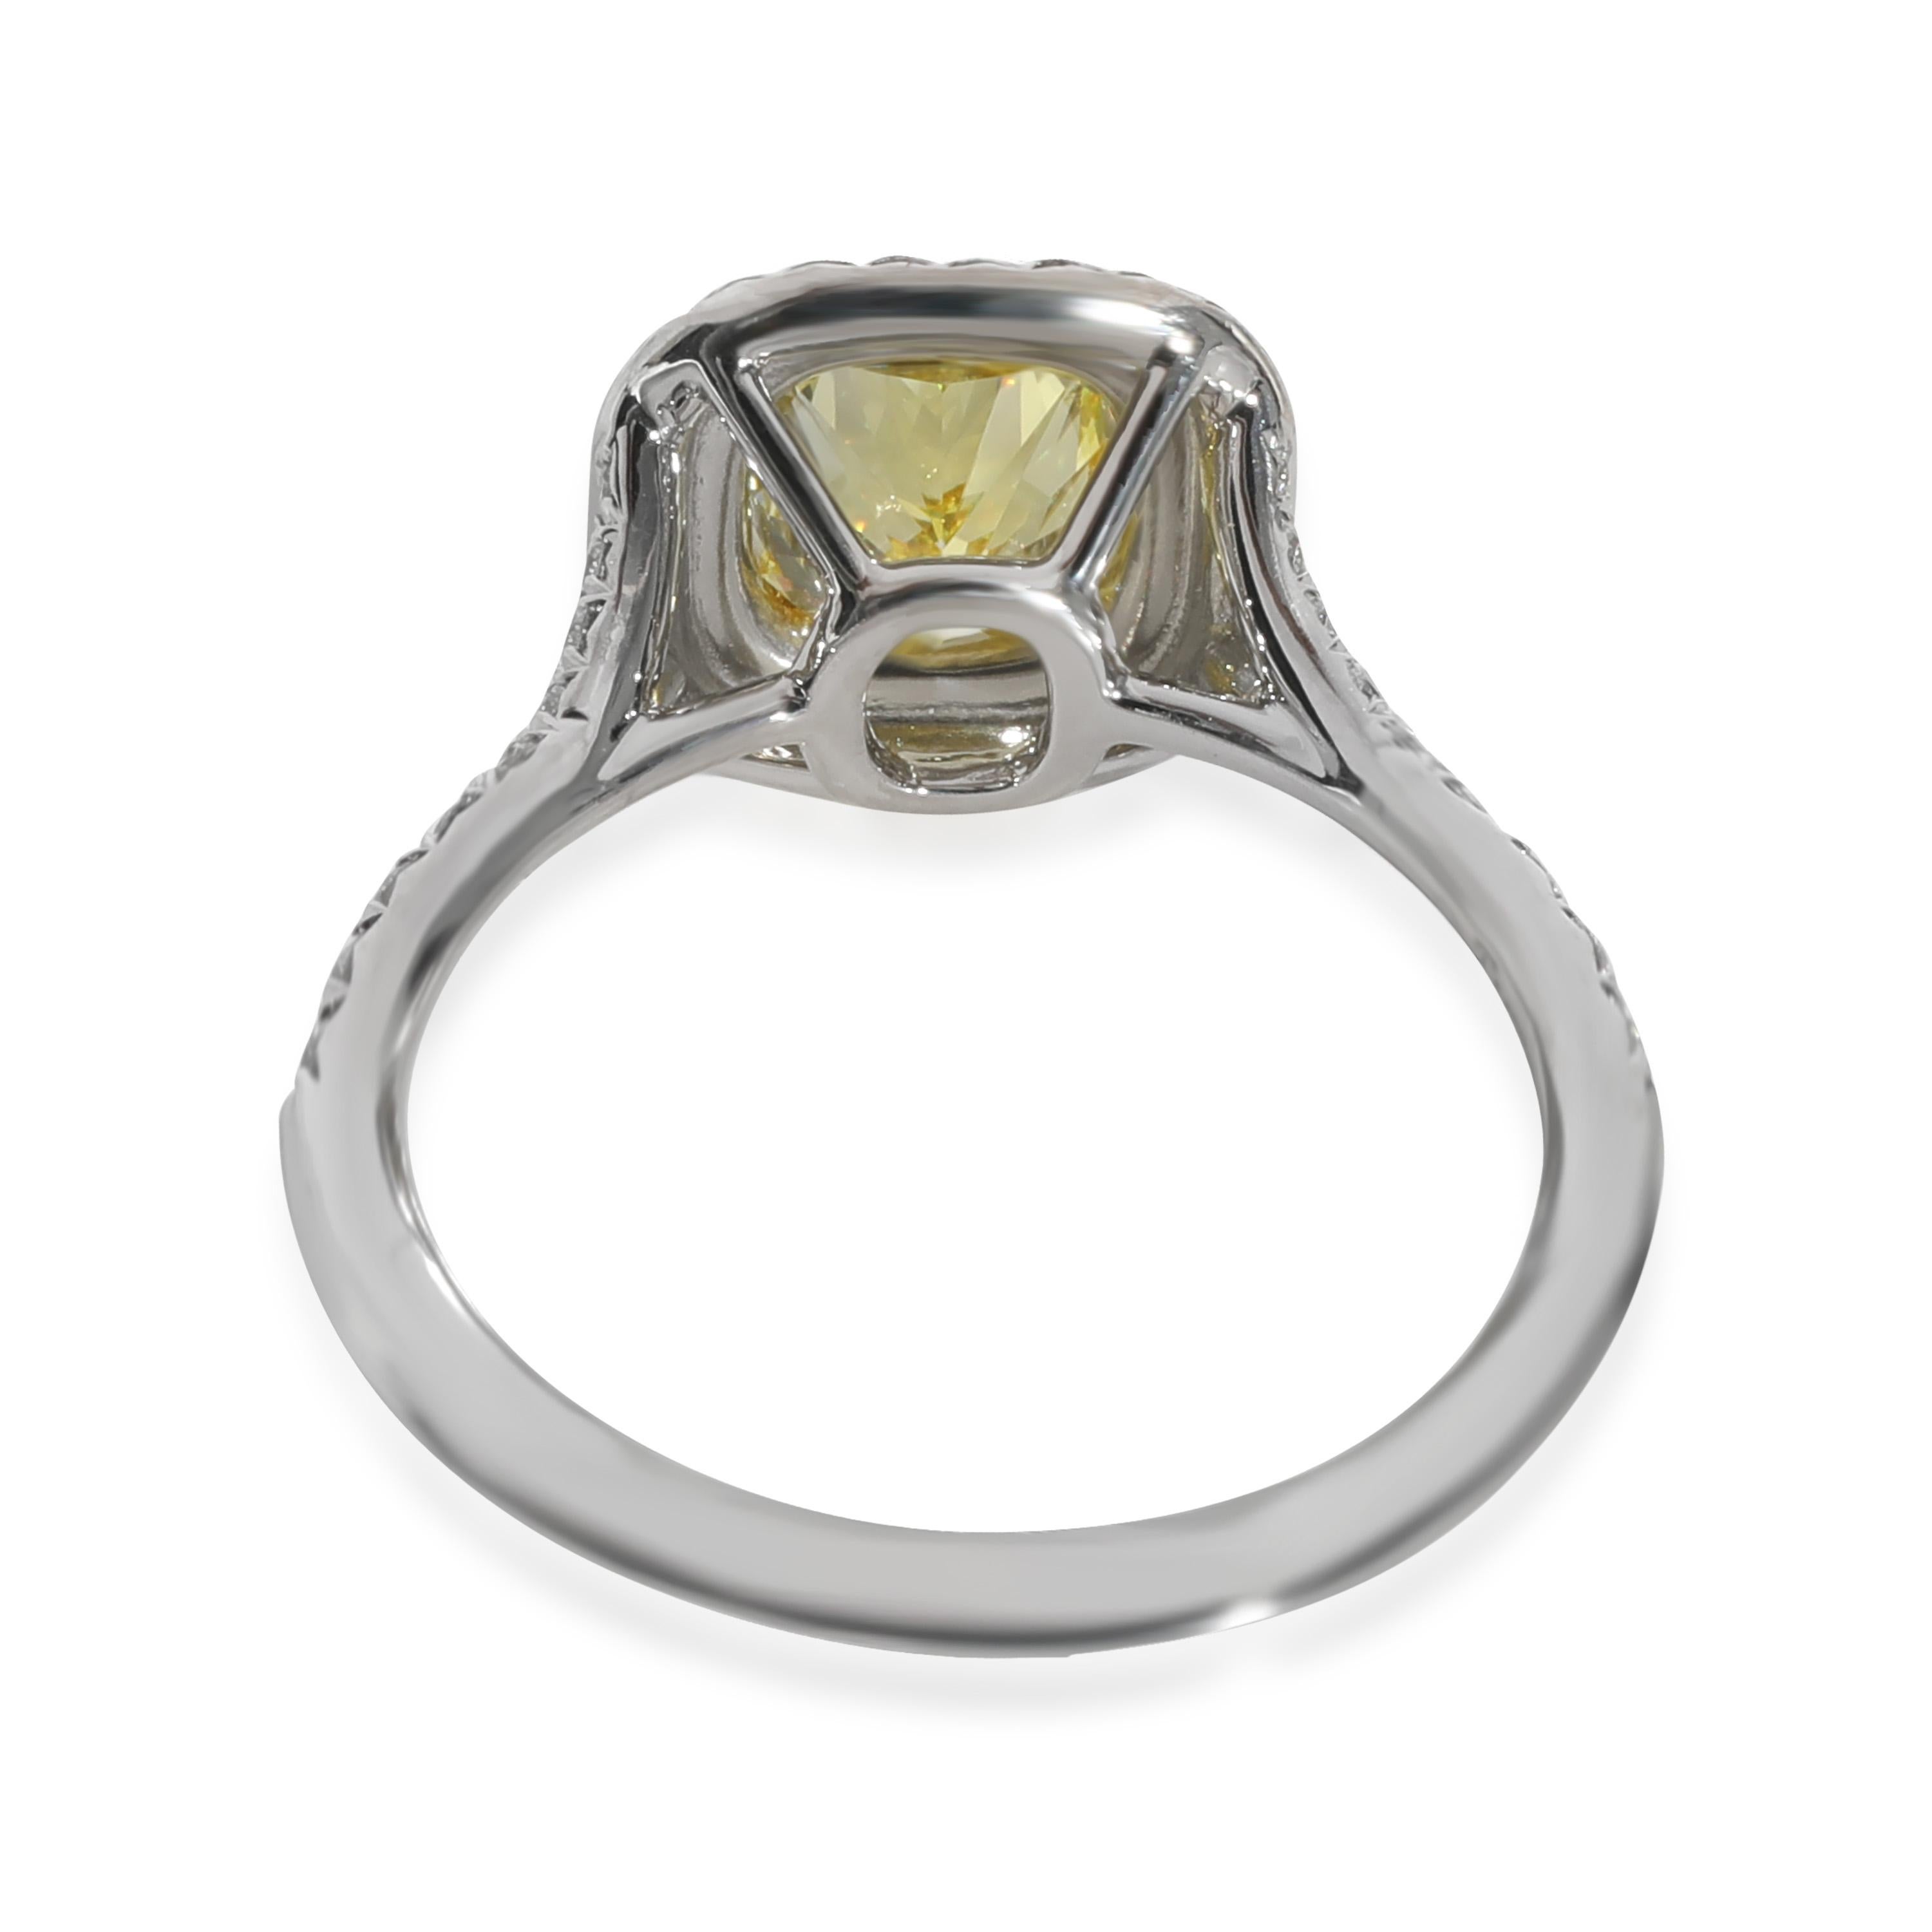 Tiffany & Co. Soleste Yellow Diamond Engagement Ring in 18k Gold & Platinum 1.98
 
 PRIMARY DETAILS
 SKU: 129373
 Listing Title: Tiffany & Co. Soleste Yellow Diamond Engagement Ring in 18k Gold & Platinum 1.98
 Condition Description: Tiffany & Co.